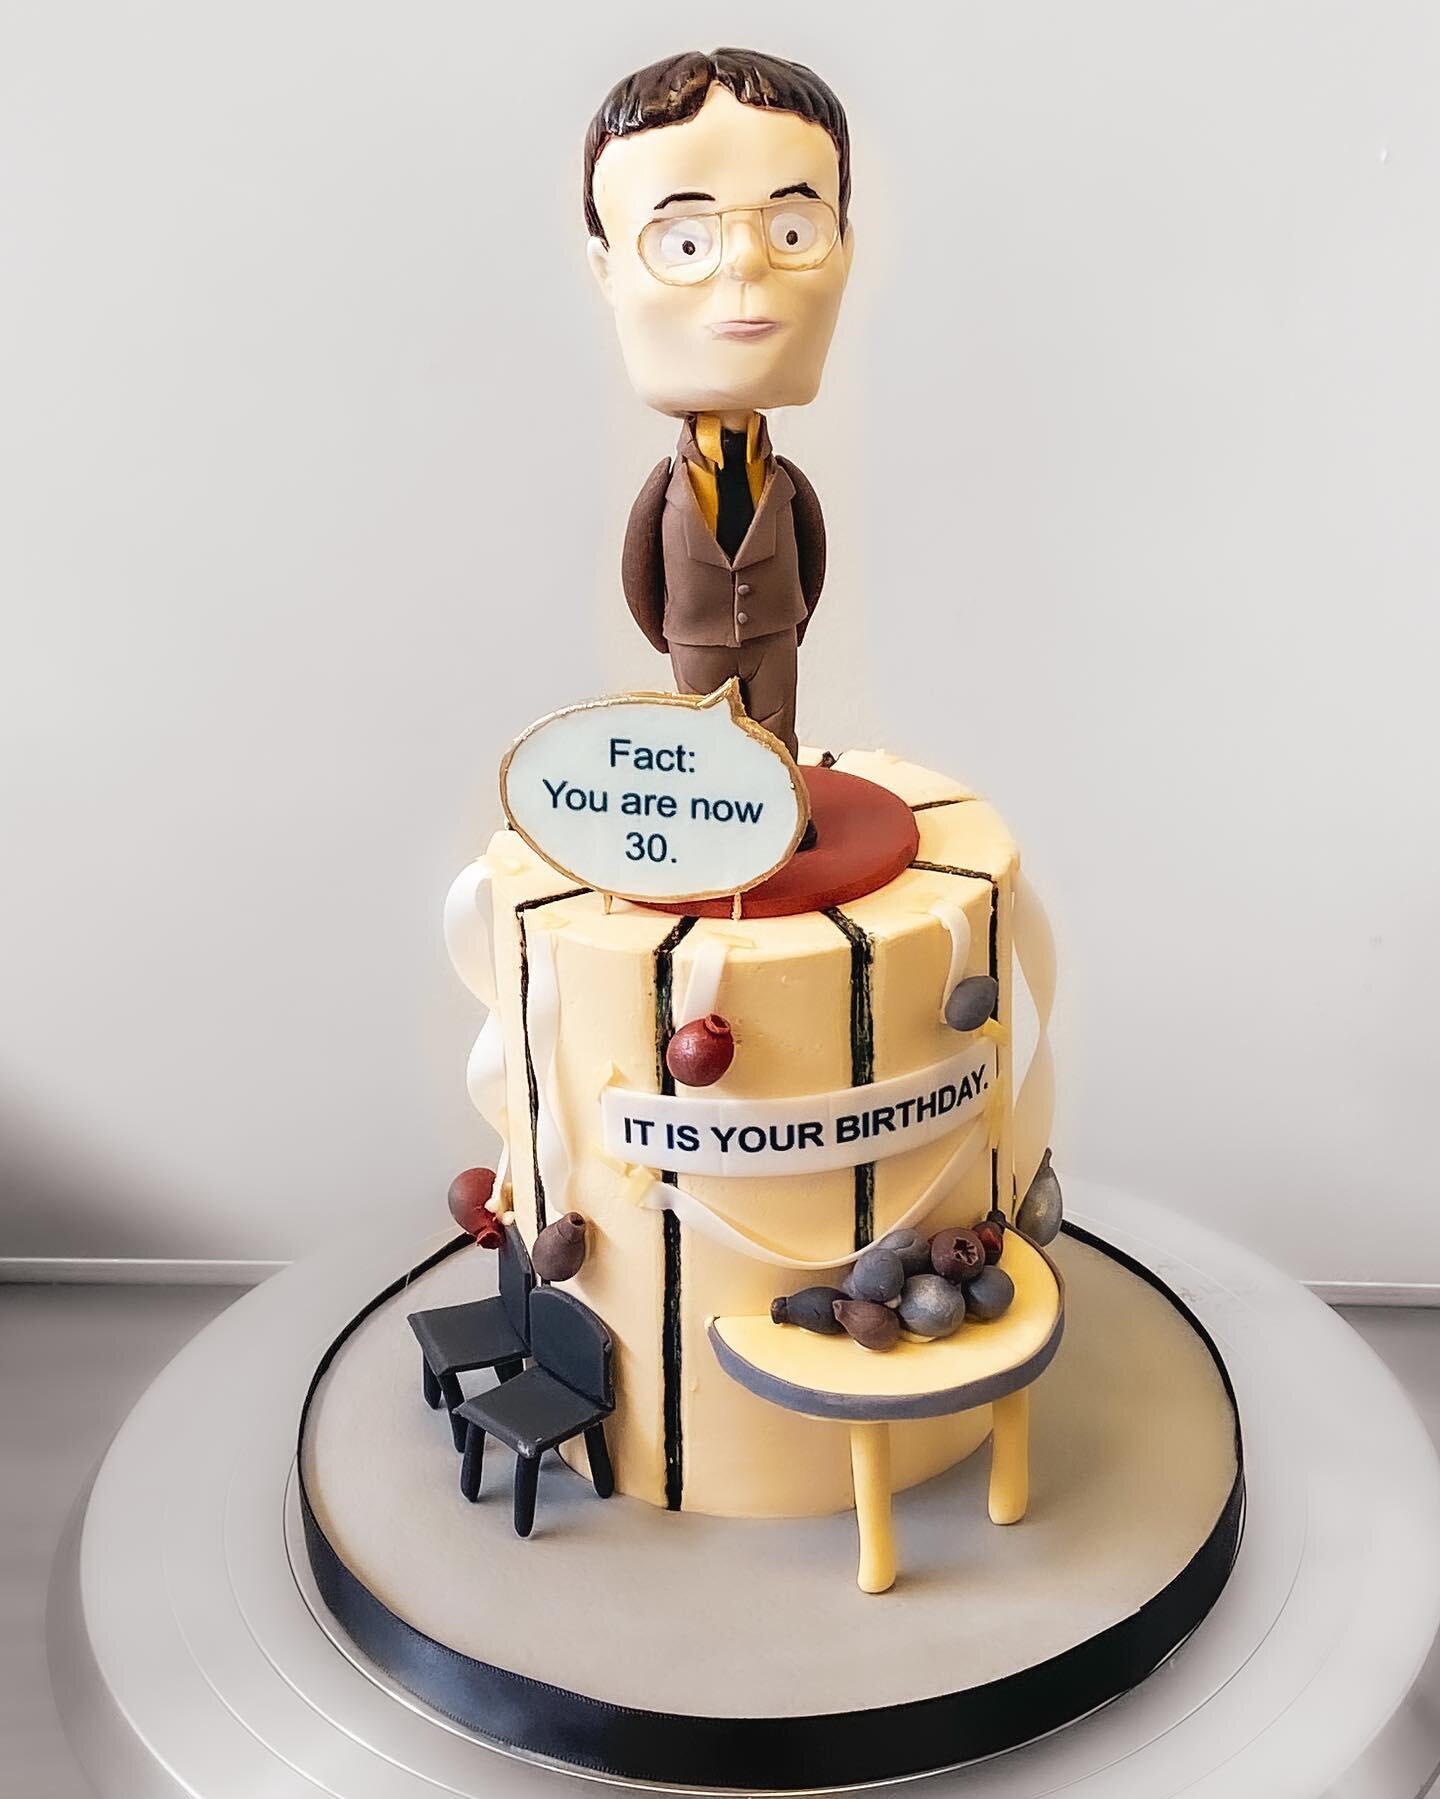 This cake was created for the ultimate #dwightshrute fan! Those who know me know that I can regurgitate way too many scenes from the office but #kellykapoor &lsquo;s birthday party planned by Jim and Dwight was probably one of my favourites.
Fun fact